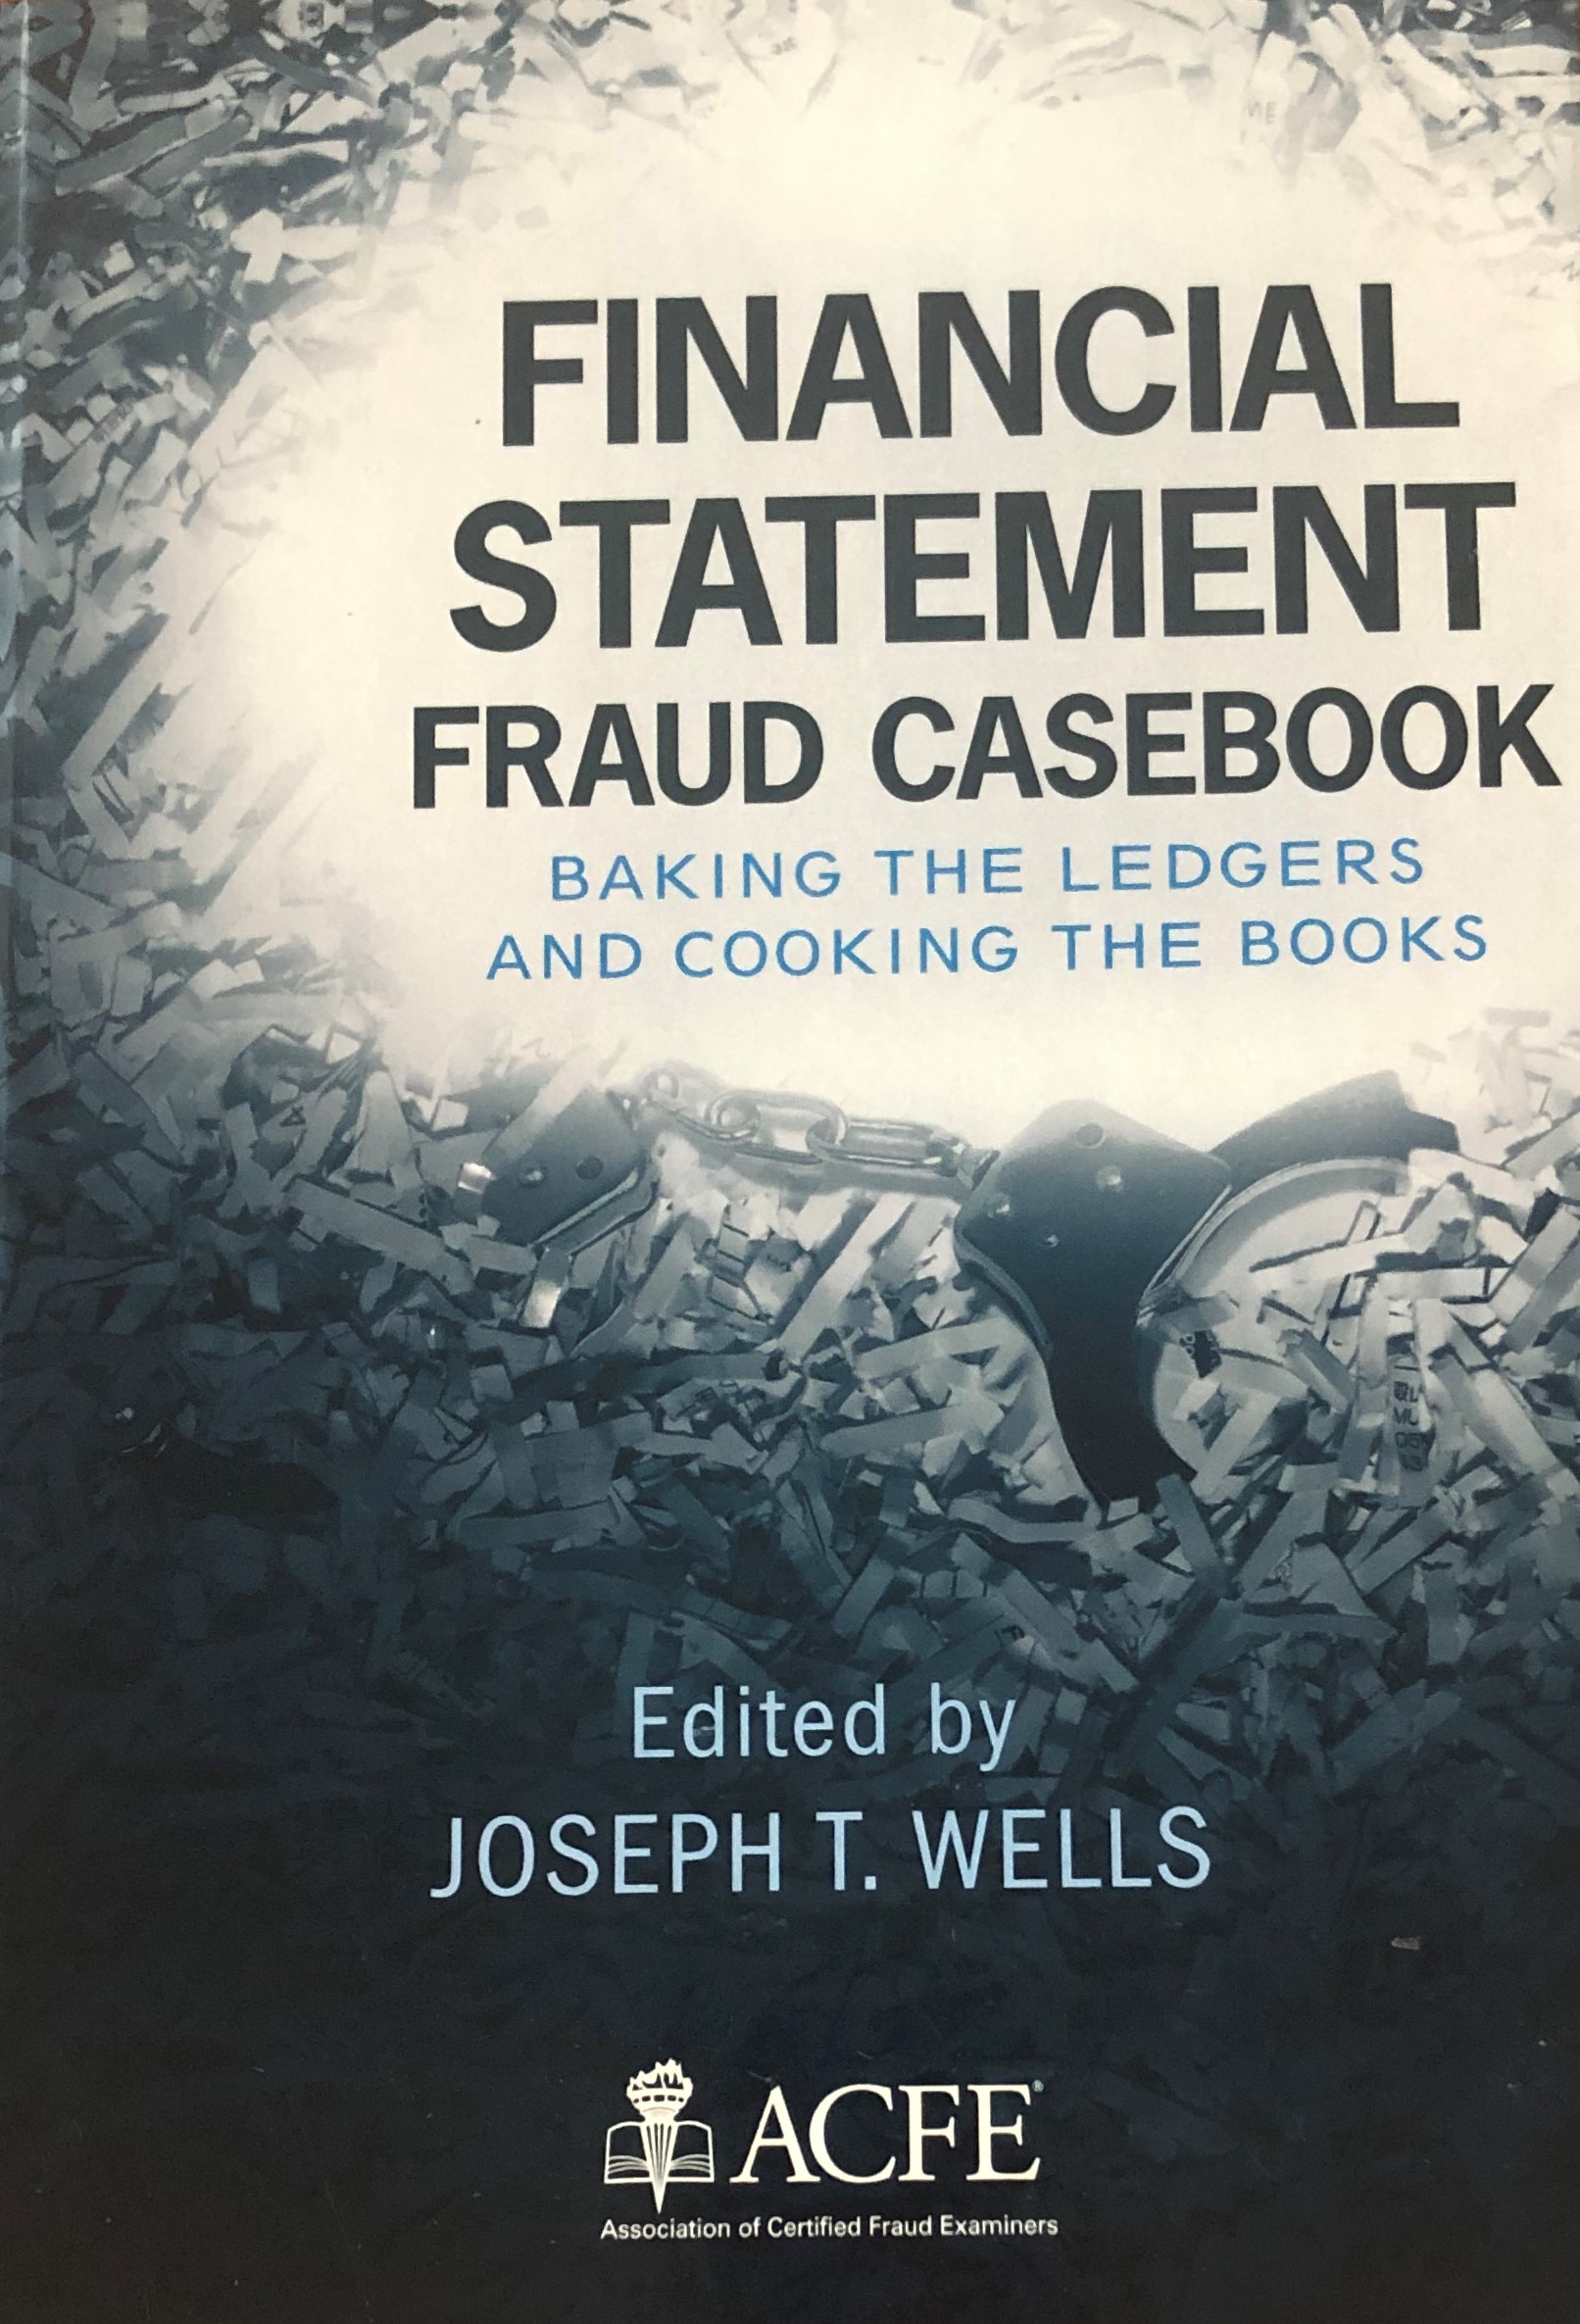 Description Financial Statement Fraud Casebook: Baking the Ledgers an Cooking the Books